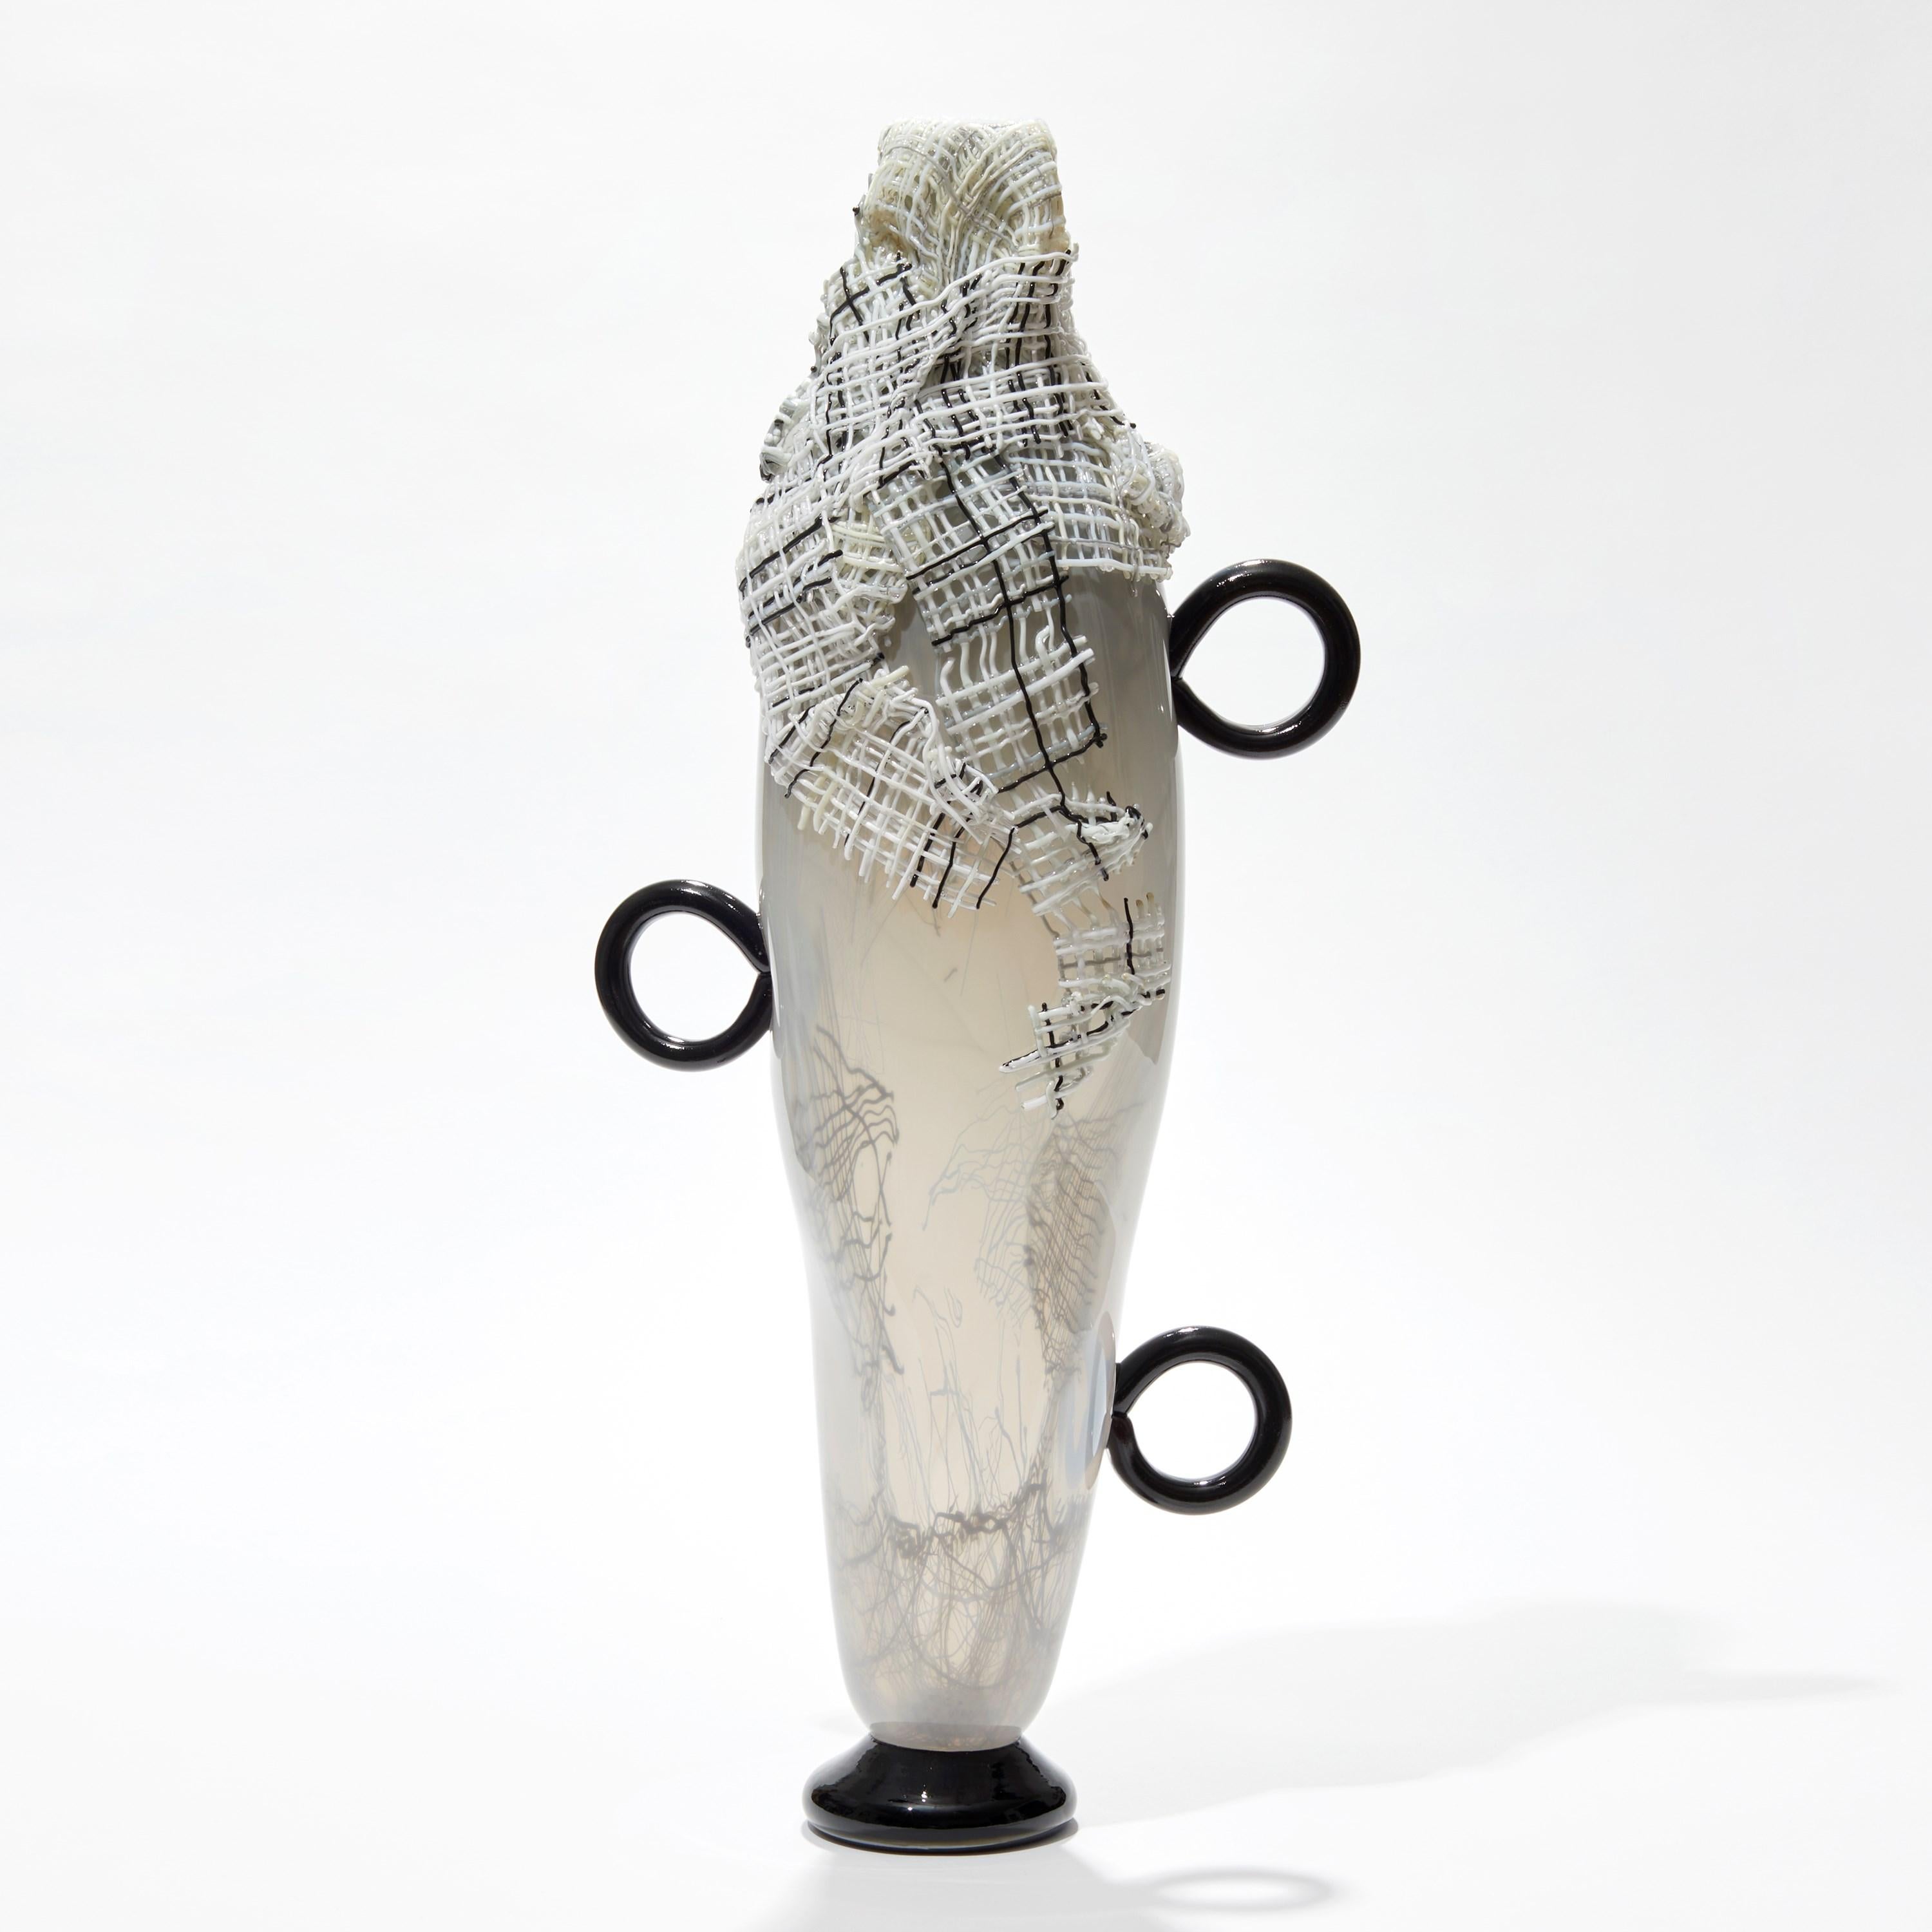 Organic Modern Only Hope Remains I, black & white standing glass sculpture by Cathryn Shilling For Sale